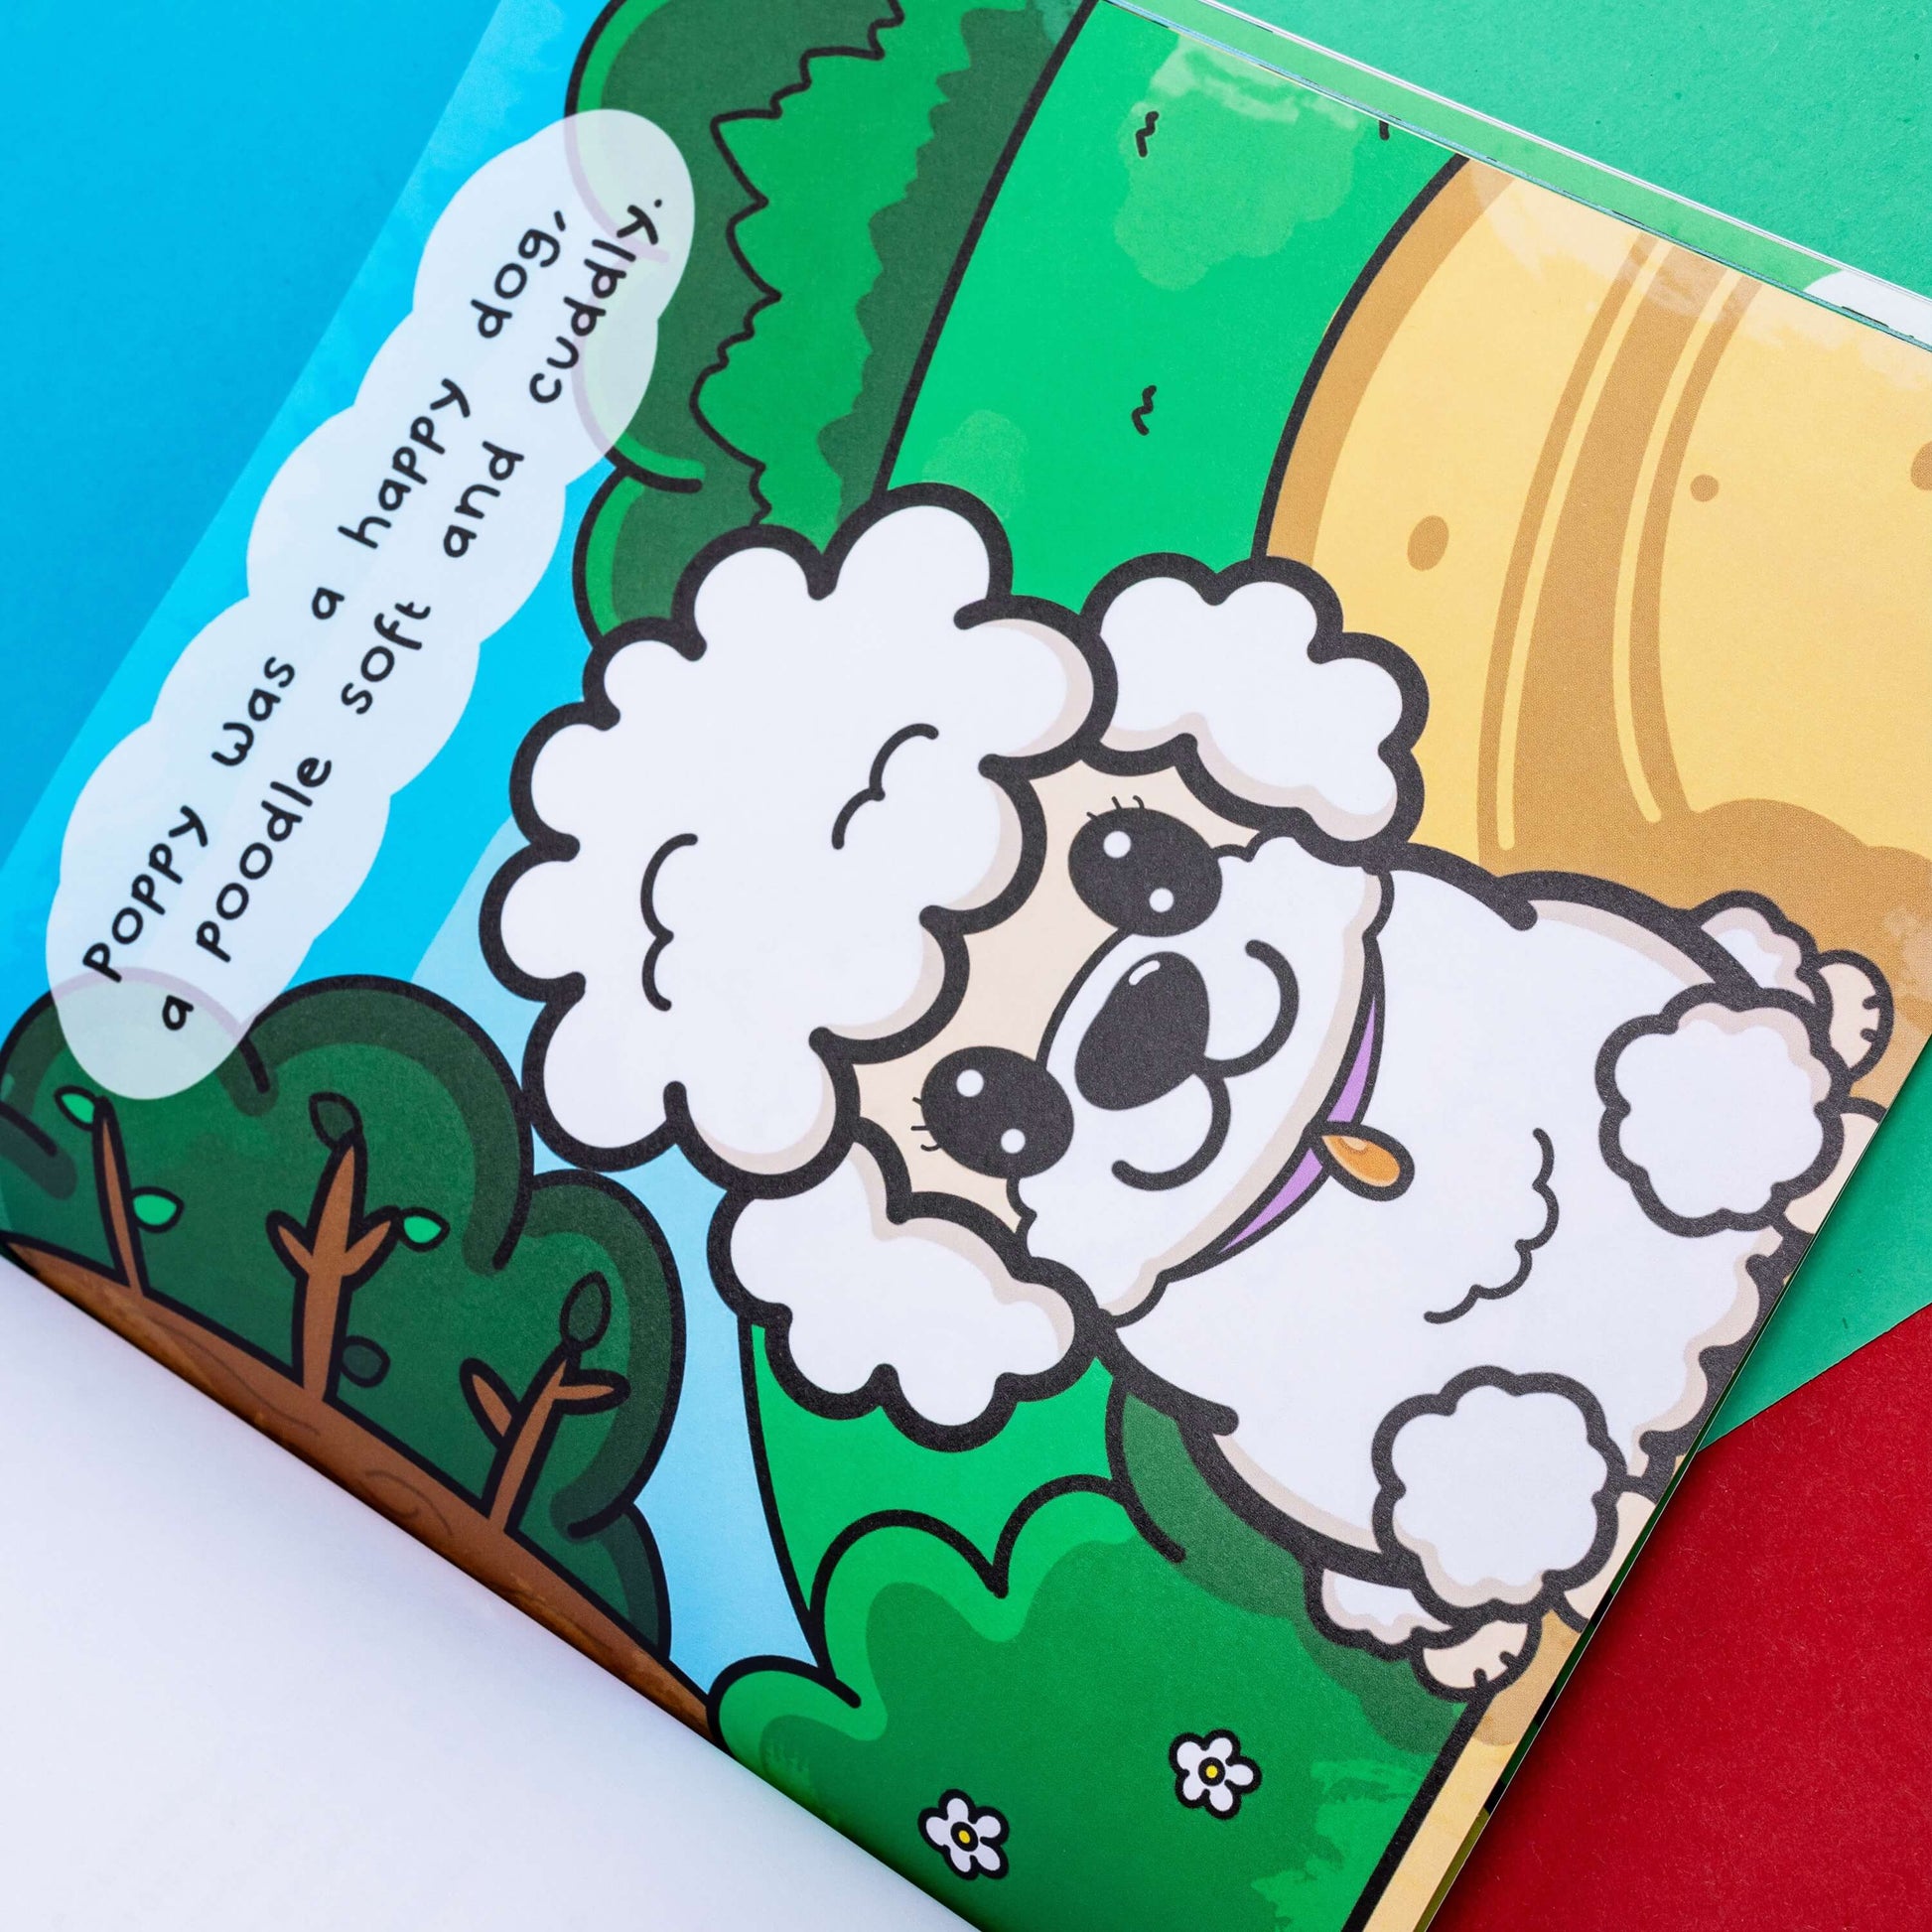 The My Invisible Friends Children's Book on a red, blue and green background. The book is open on a page about poppy the poodle. The hand illustrated book is raising awareness for invisible illnesses.